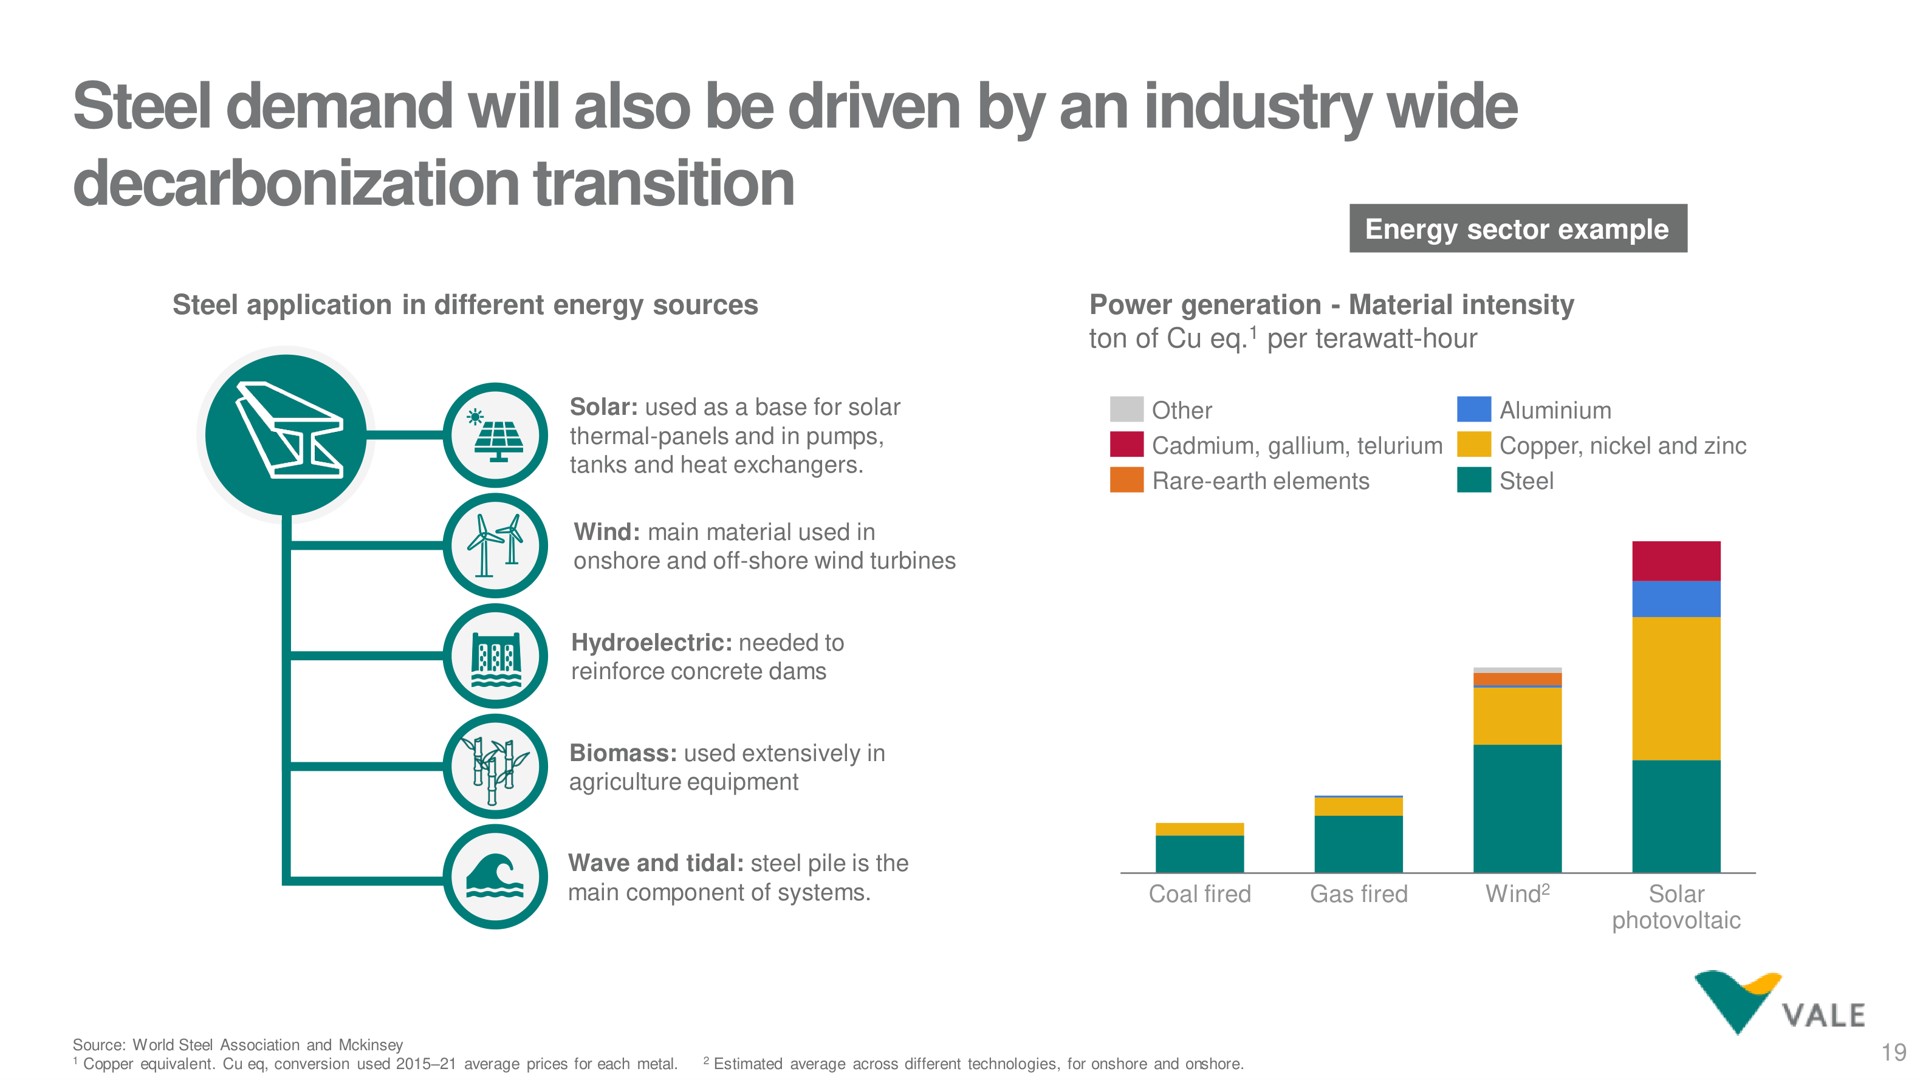 steel demand will also be driven by an industry wide decarbonization transition | Vale